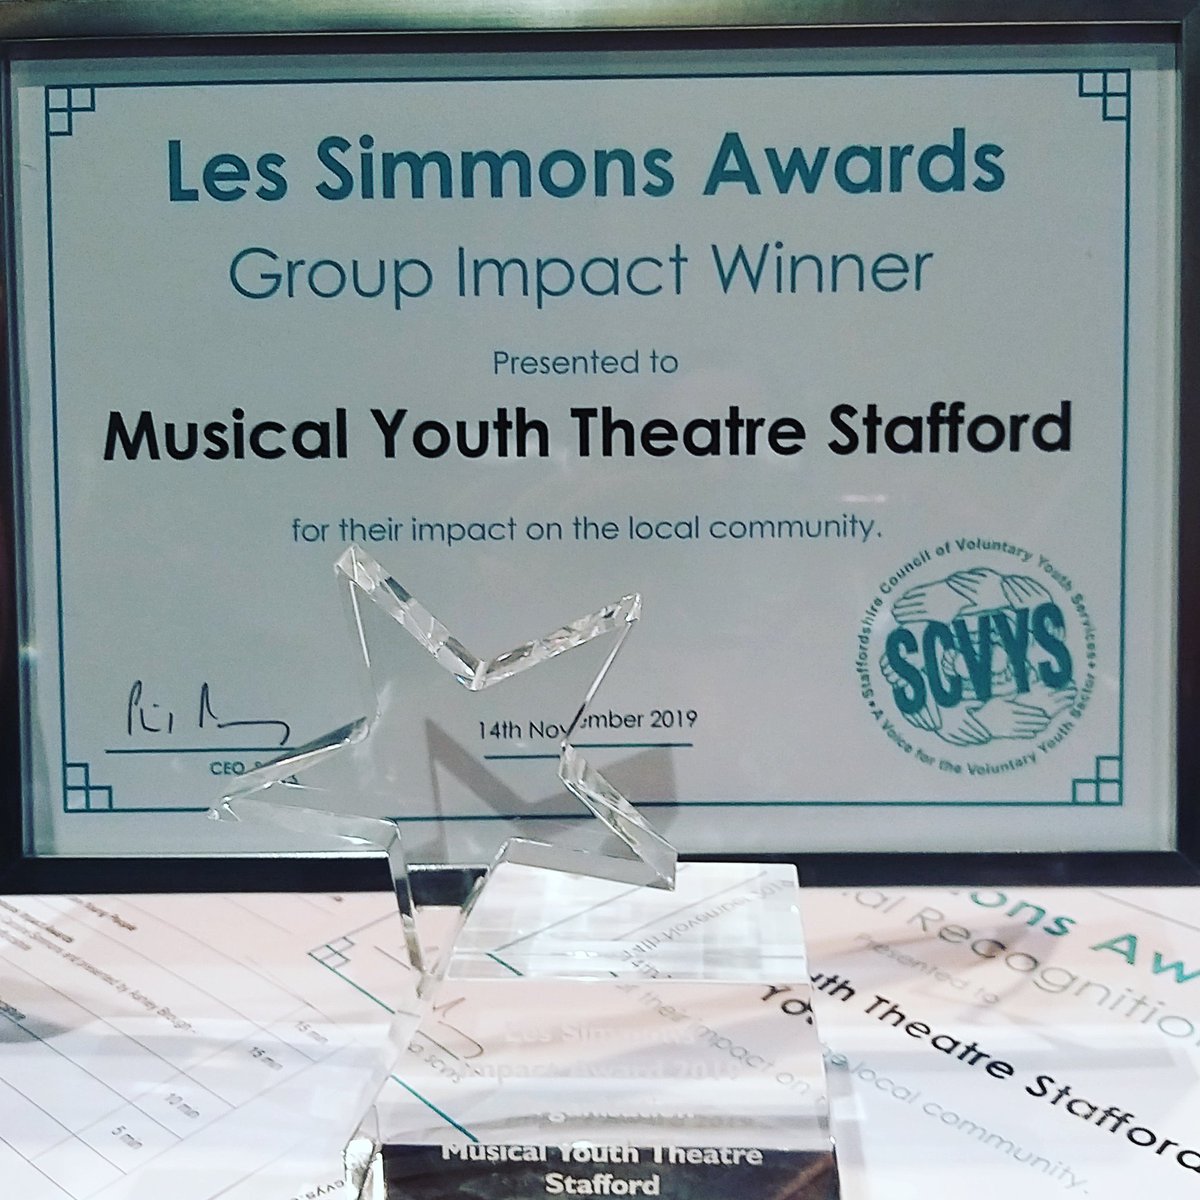 We are so thrilled to have been nominated and to win the Les Simmons Youth Impact Award through @staffscvys this evening! Thank you to everyone who voted for us. #mytsfamily #musicaltheatre #Stafford #staffordshiretheatre #youththeatre #lovestafford #volunteers #youthgroup